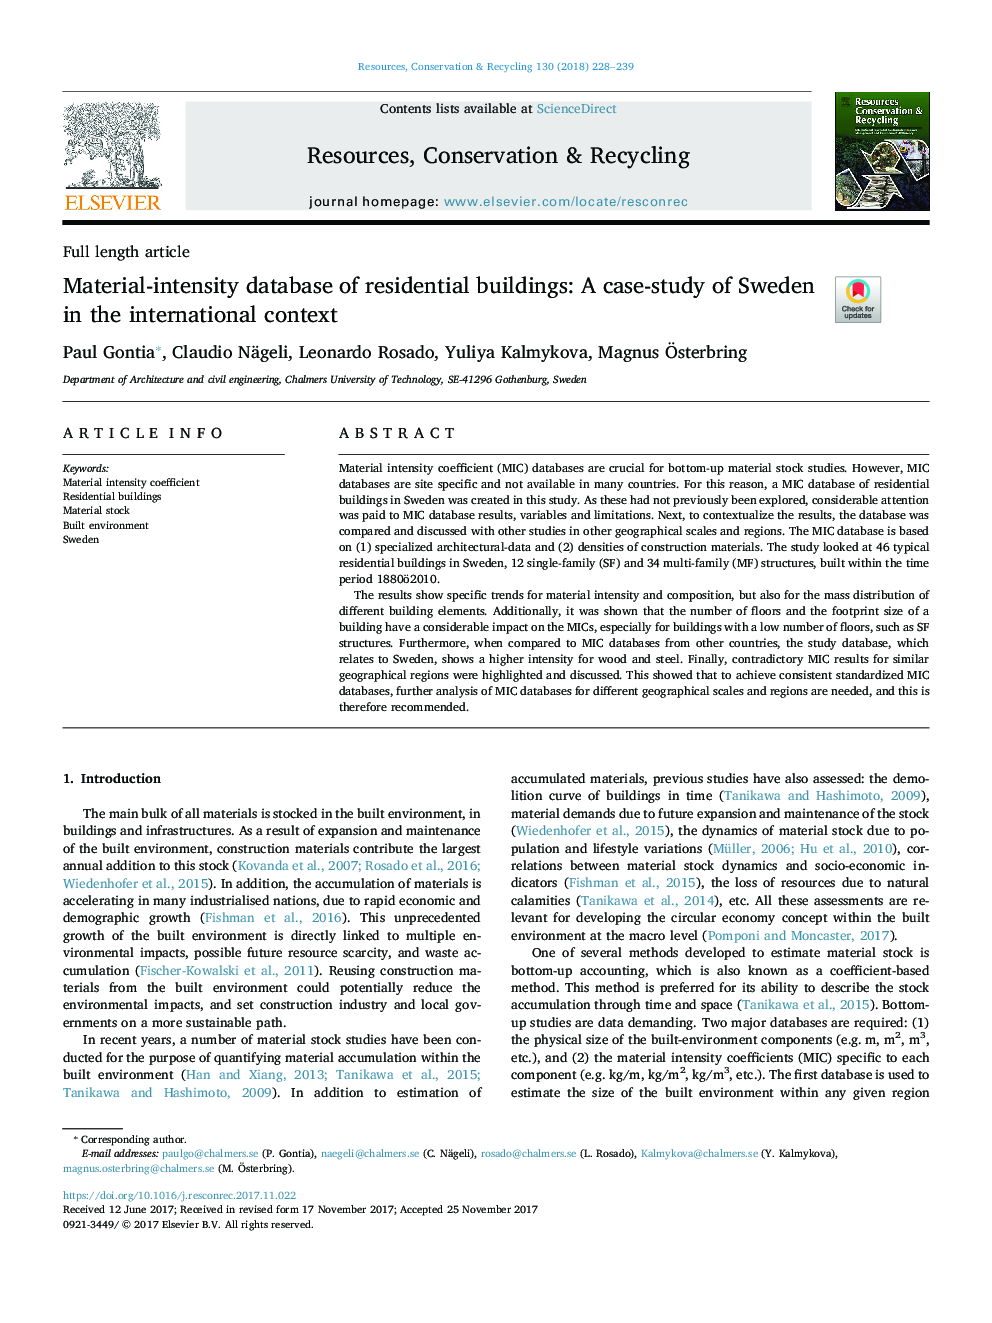 Material-intensity database of residential buildings: A case-study of Sweden in the international context